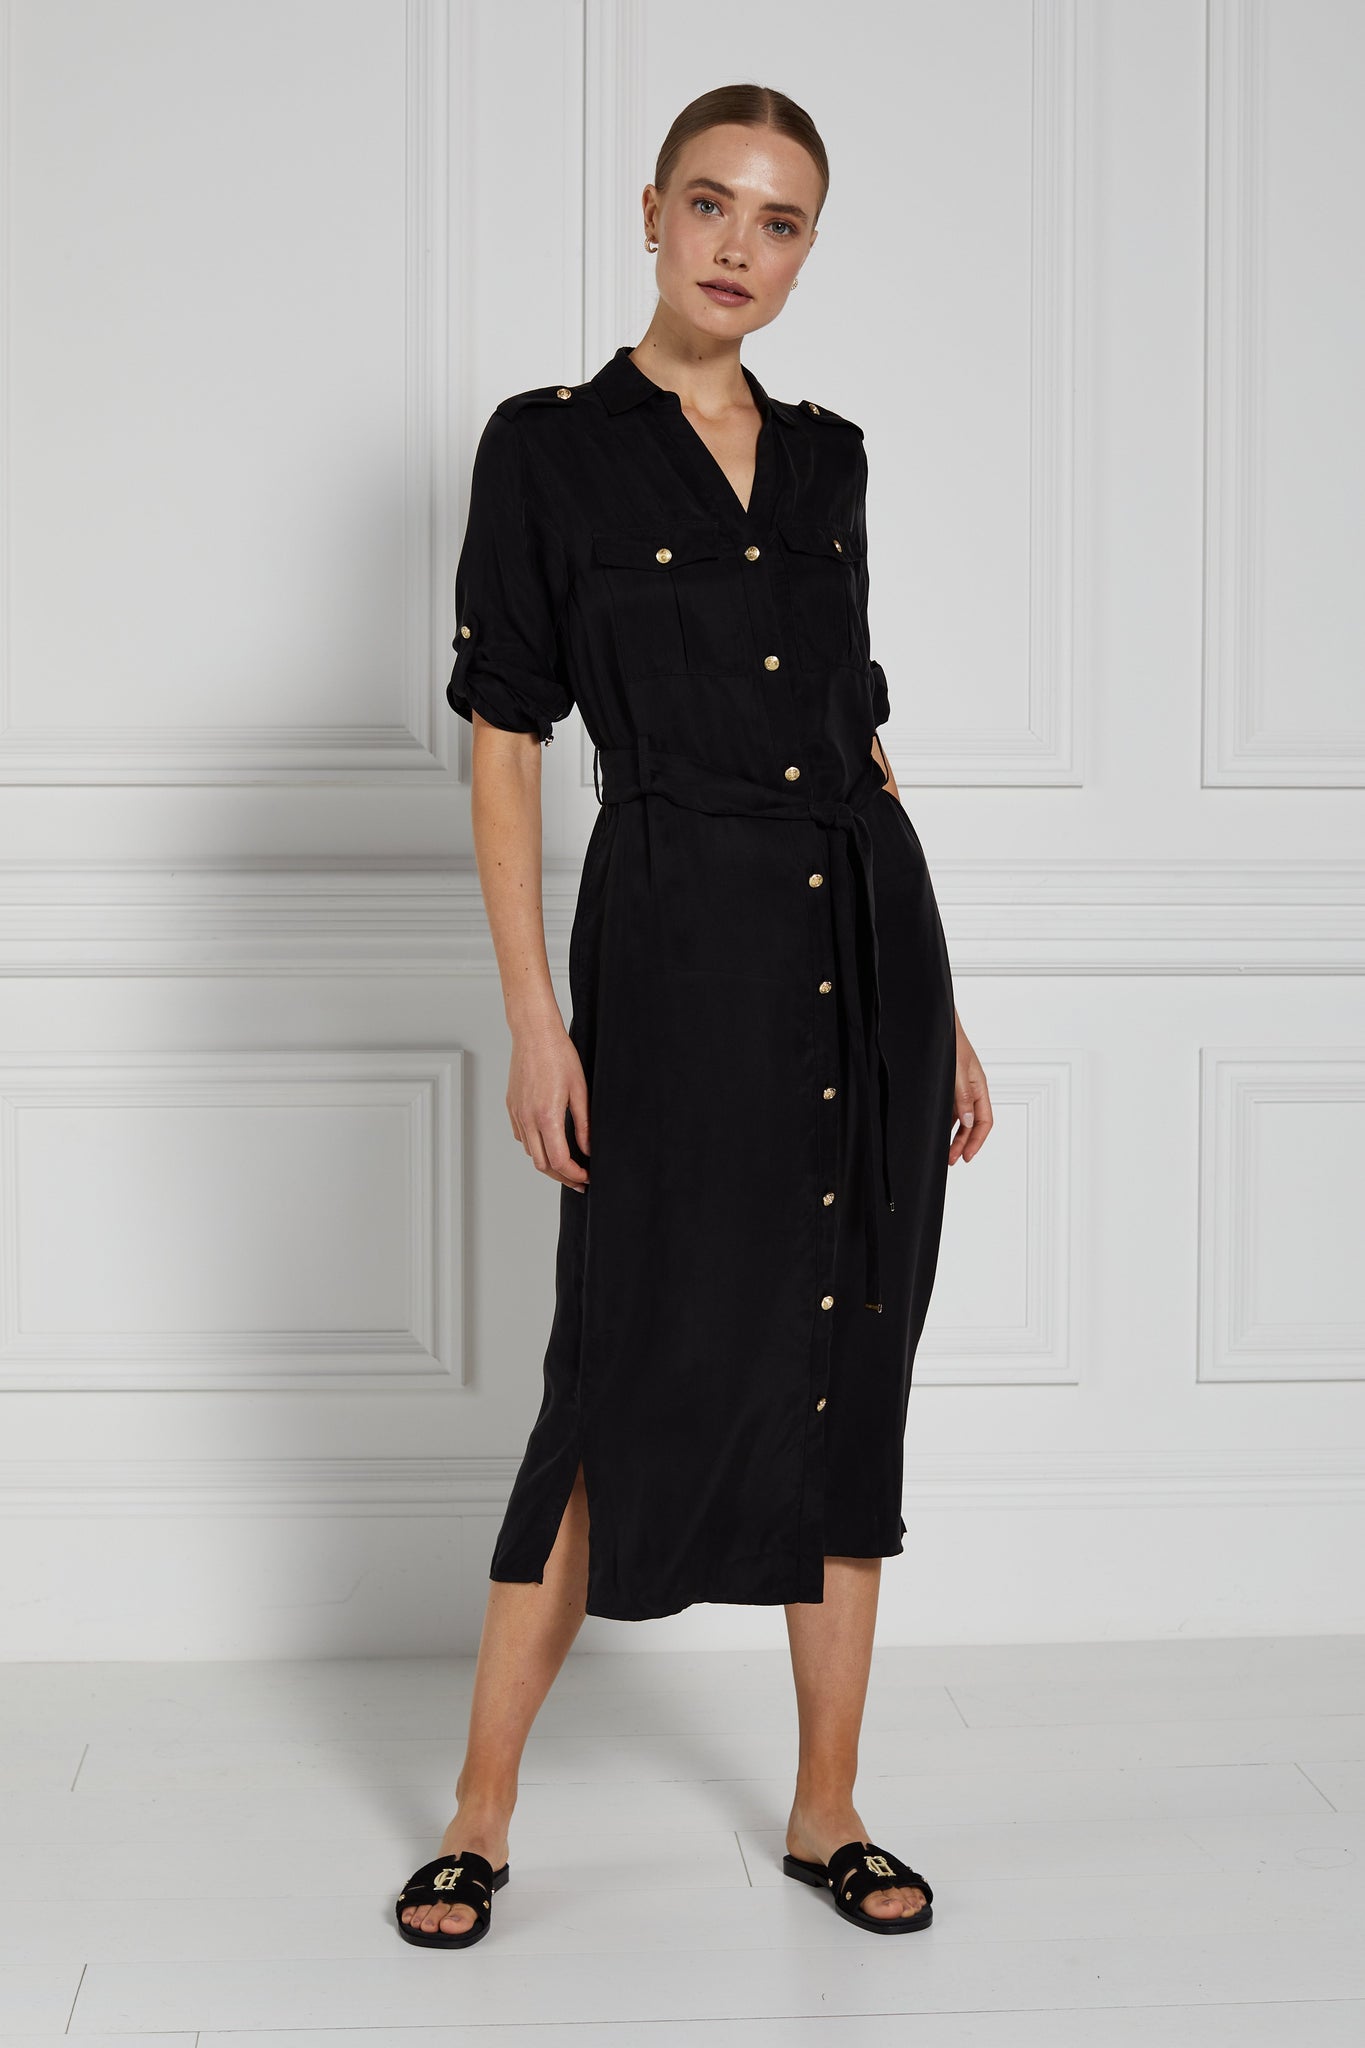 womens black military midi shirt dress with tie around waist and gold buttons down the front with black suede sliders